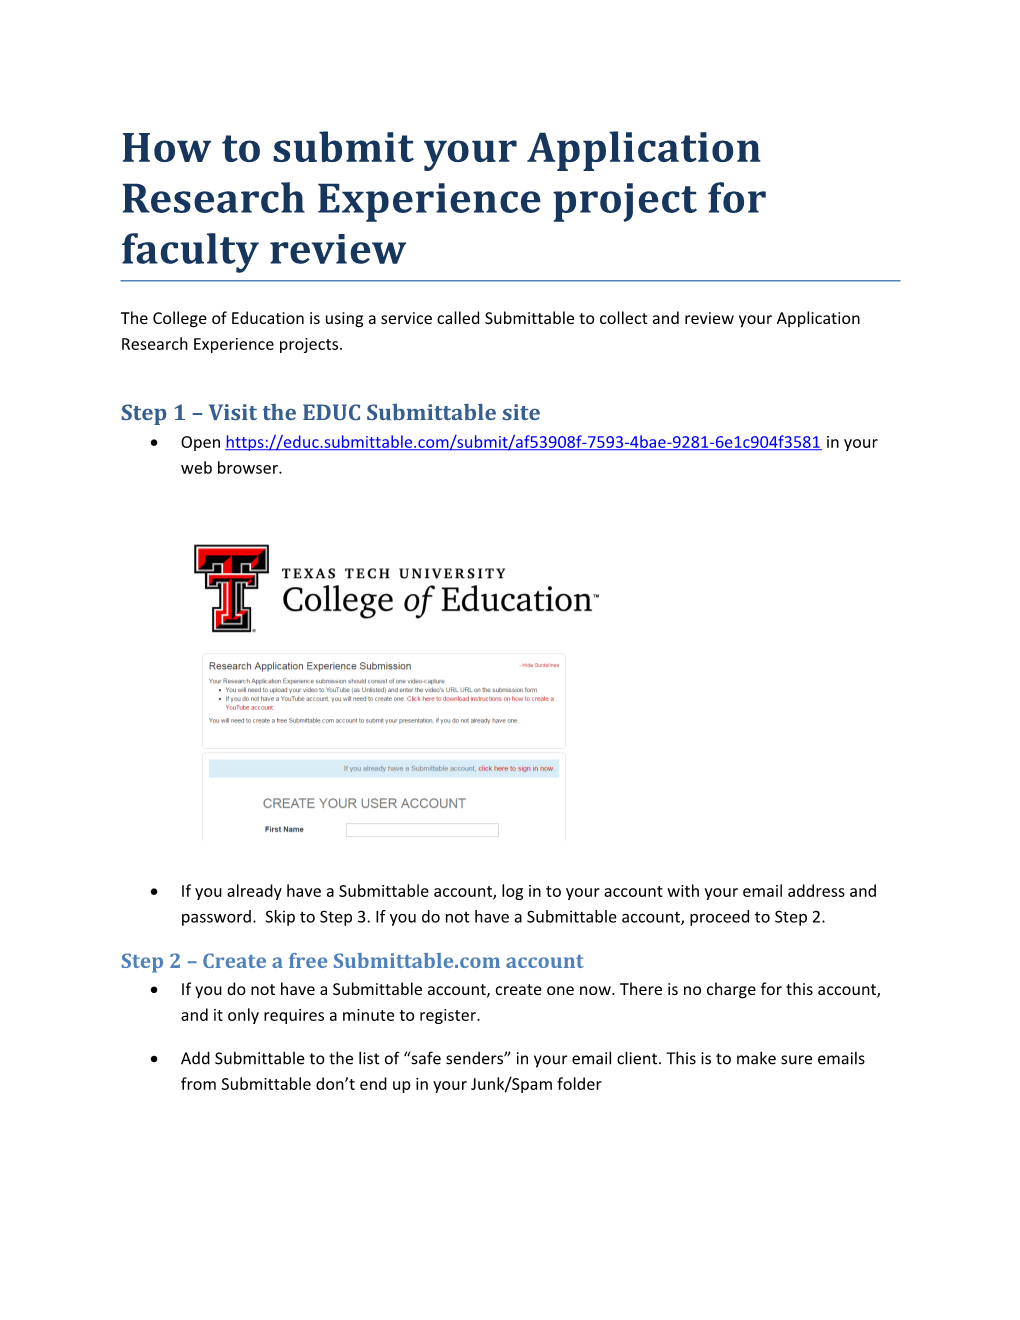 How to Submit Your Application Research Experience Project for Faculty Review